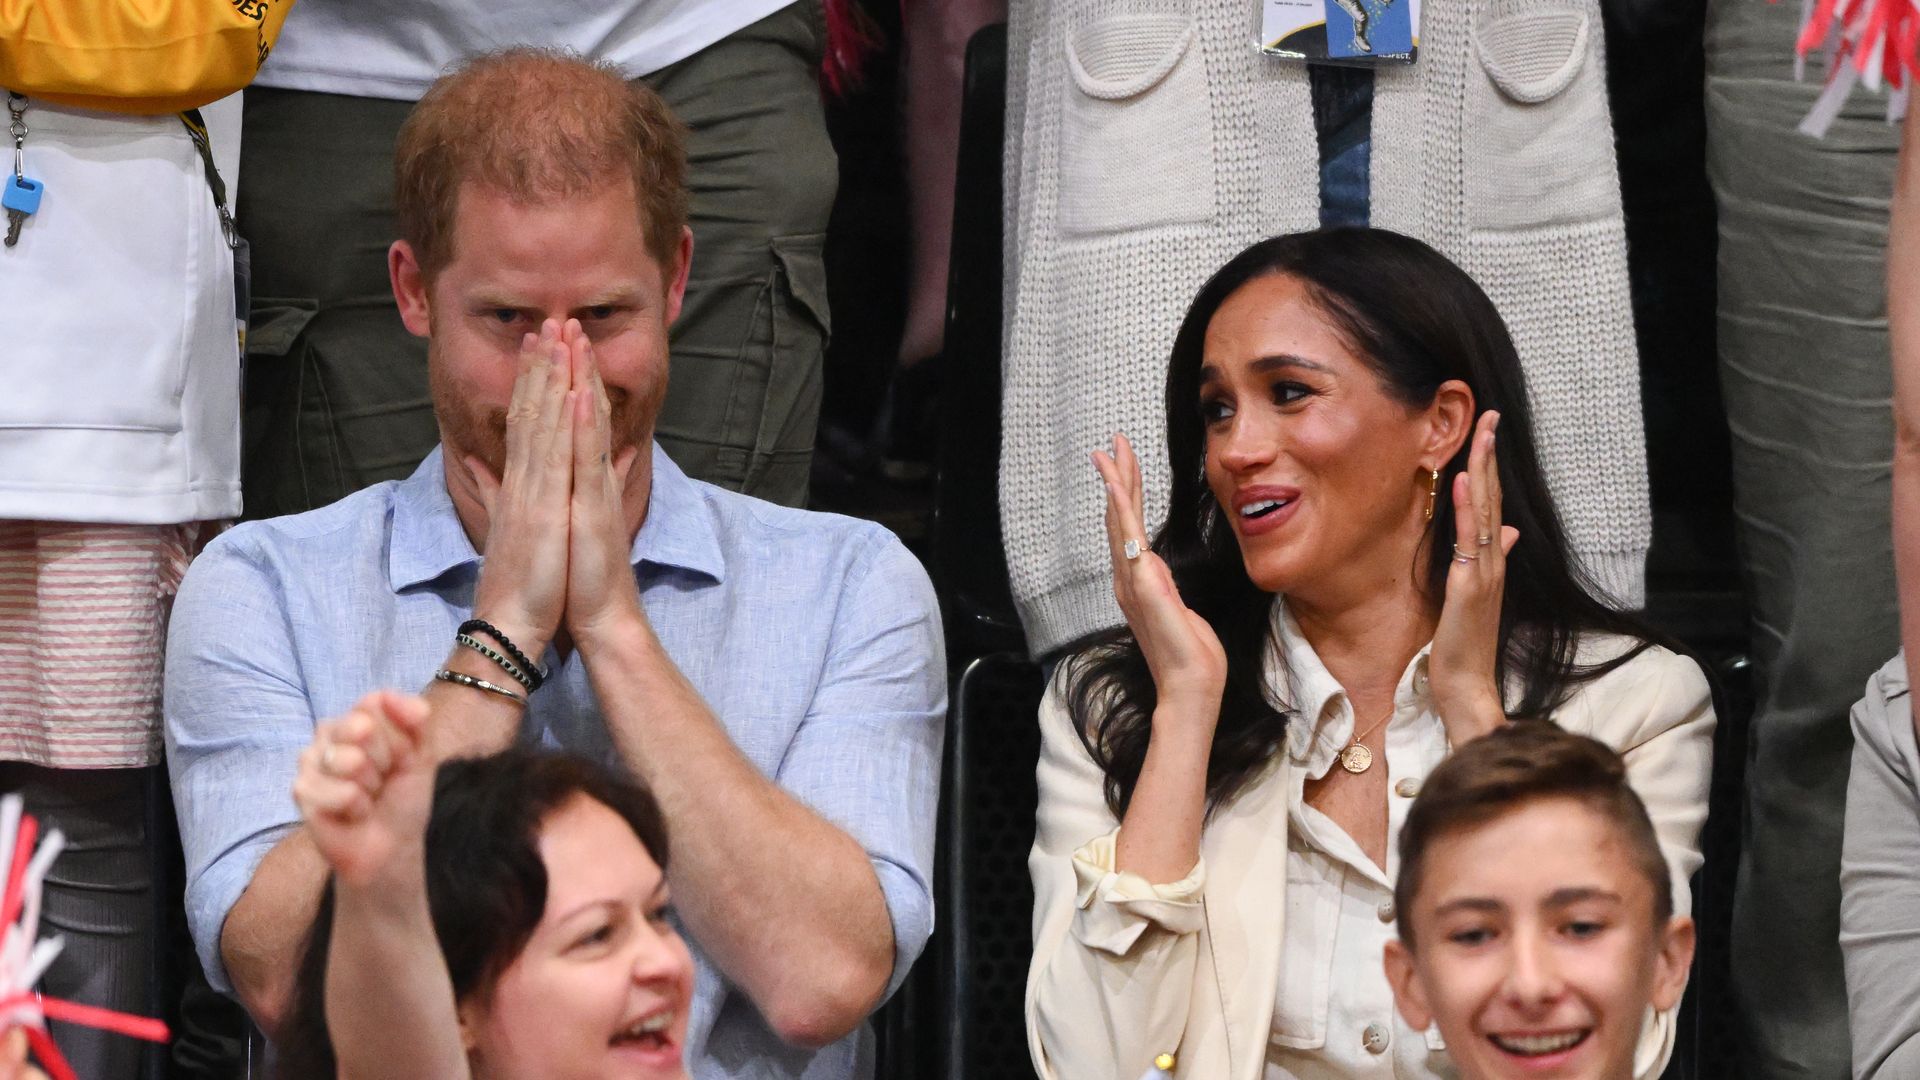 Prince Harry covering his mouth as Meghan Markle applauds next to him